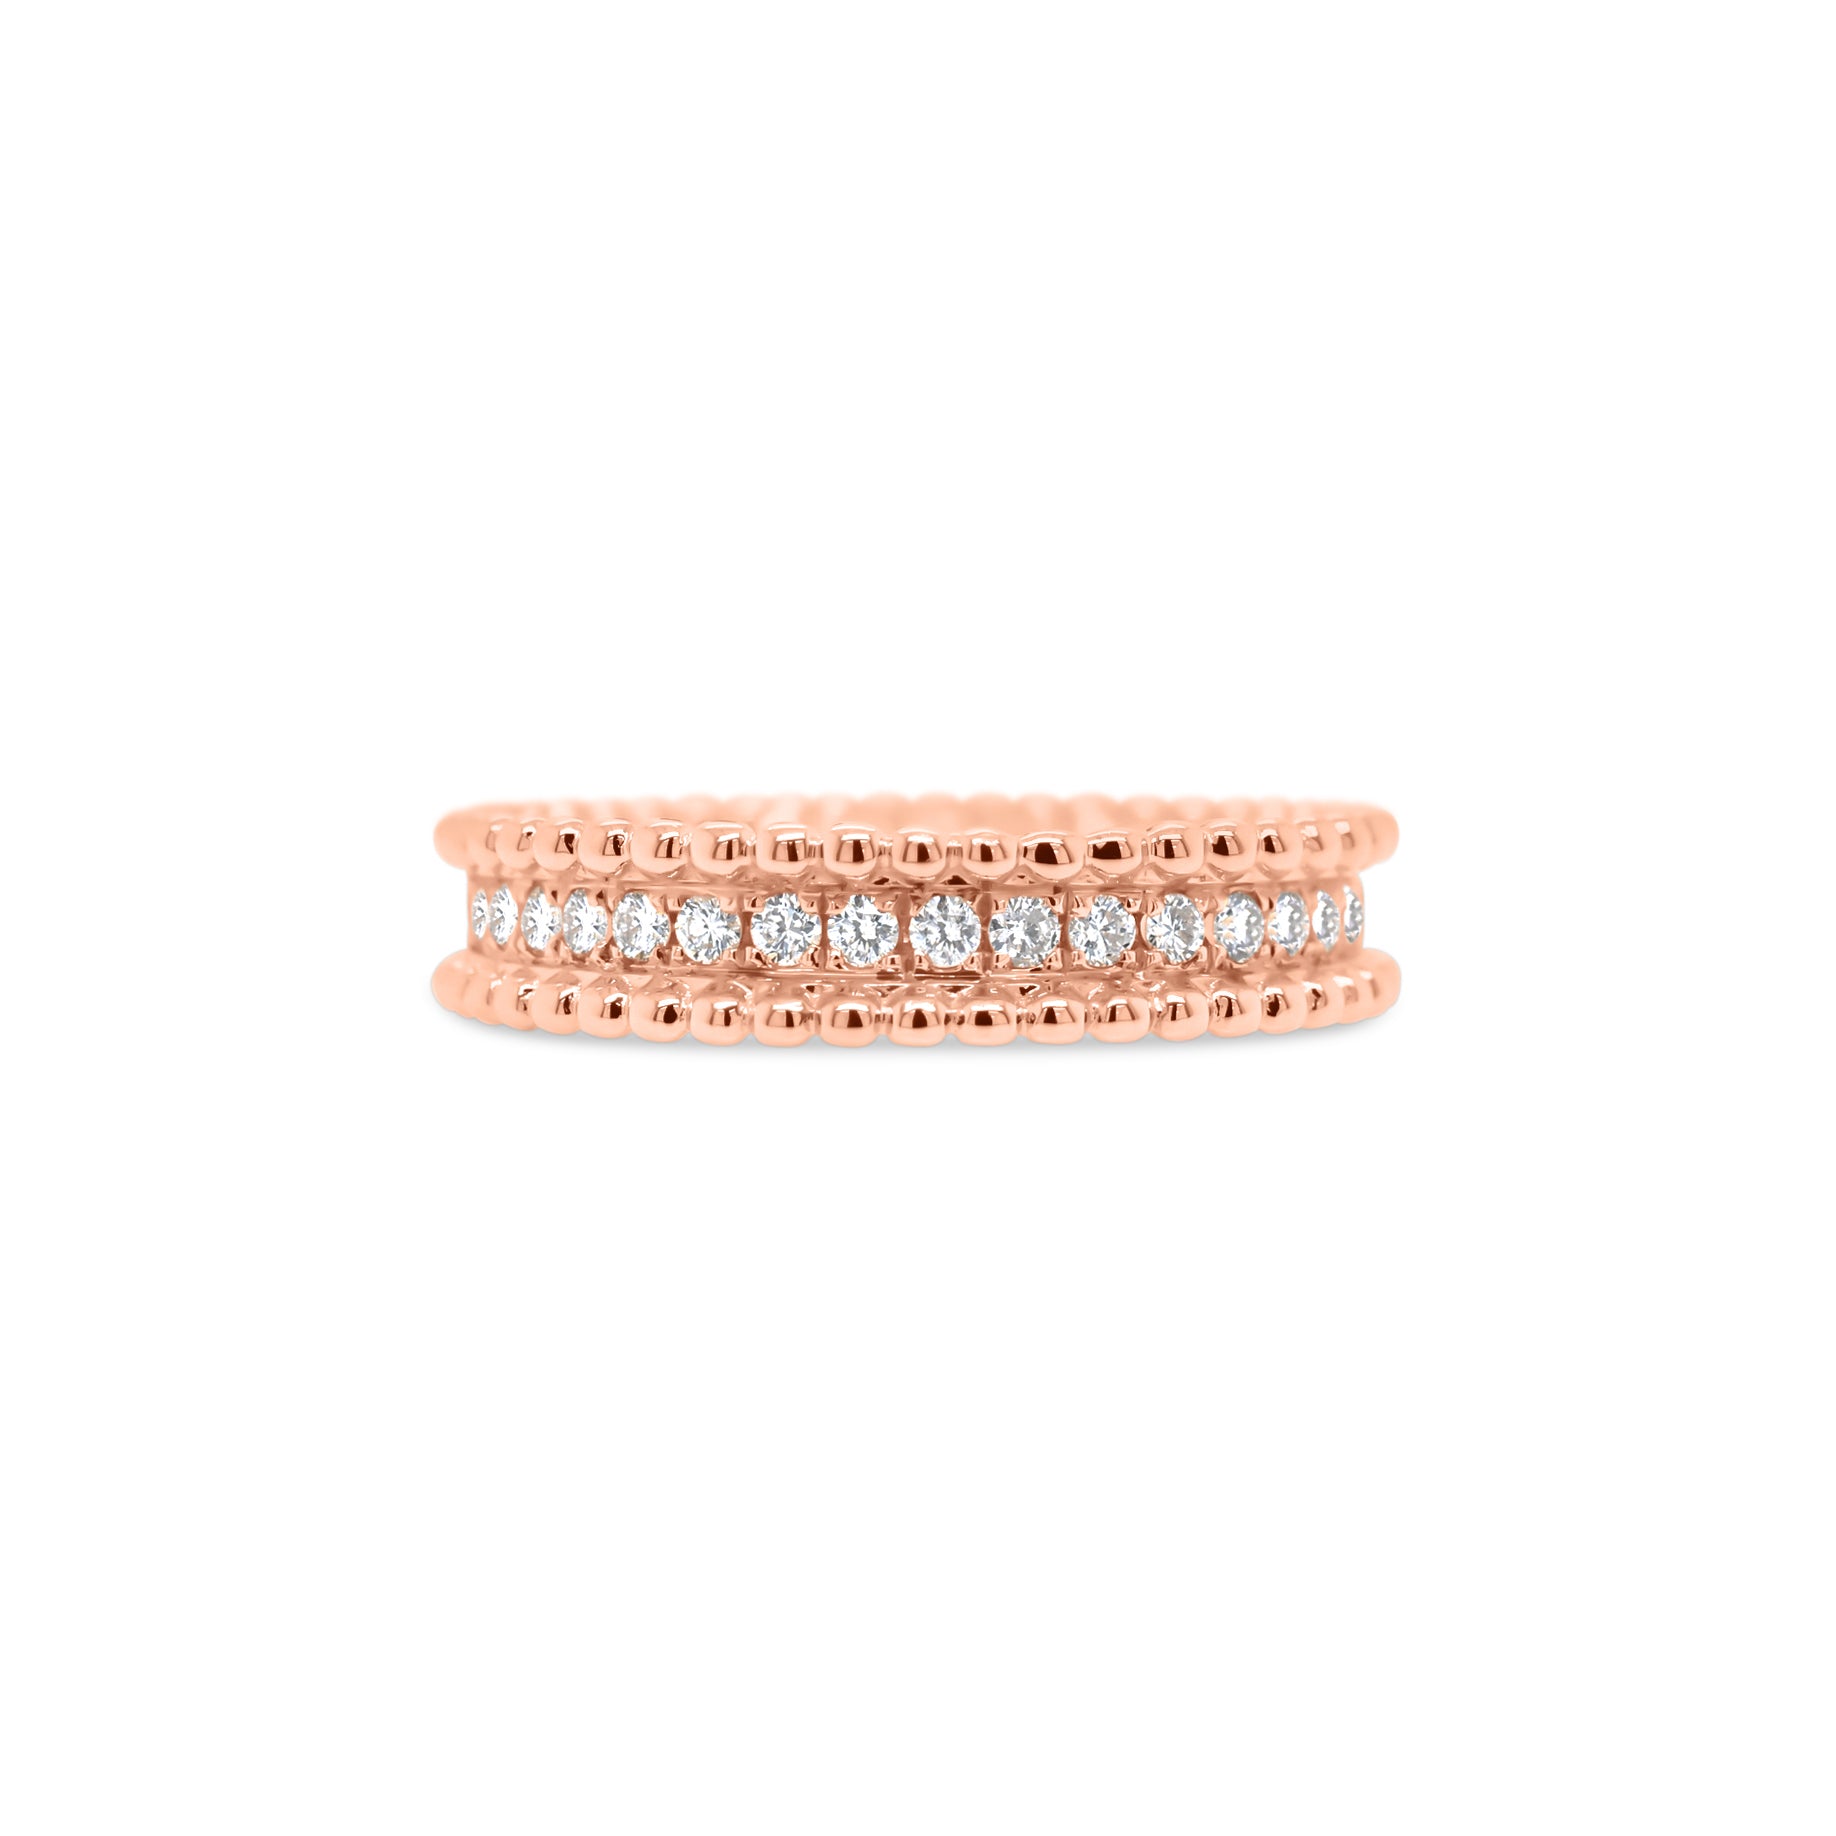 Diamond & Beaded Gold Stackable Ring  - 18K gold weighing 4.02 grams  - 18 round diamonds totaling 0.23 carats